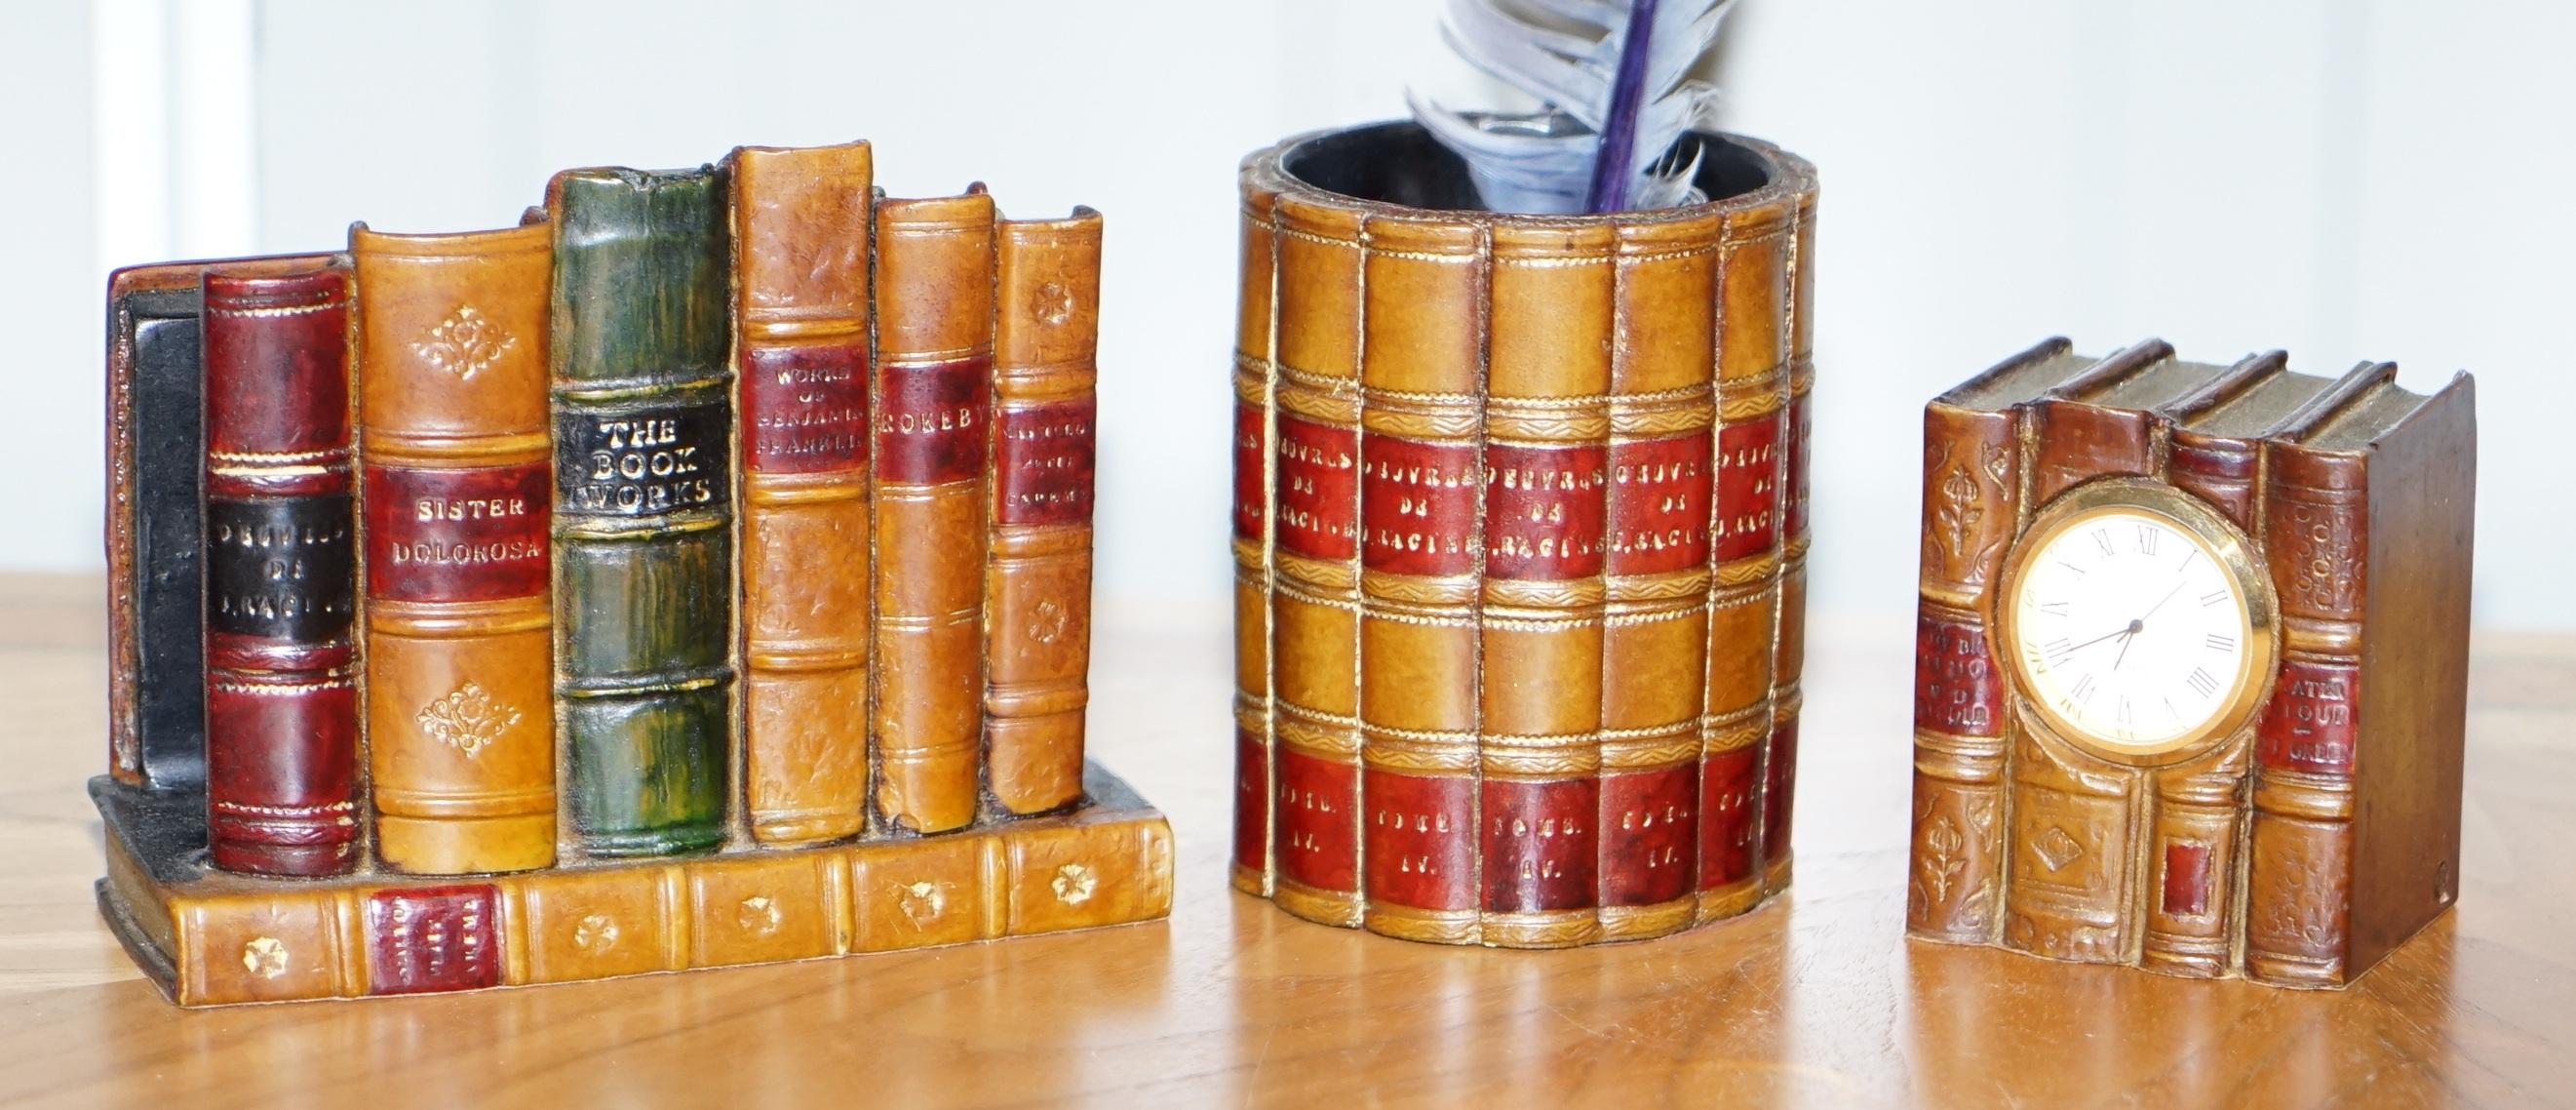 We are delighted to offer for sale this lovely suite of brown leather desk accessories

Including a clock in a set of books, a pen pot made up of books and a desk / envelope tidy

This is a very sweet set, it looks very Theodore Alexander

Pen